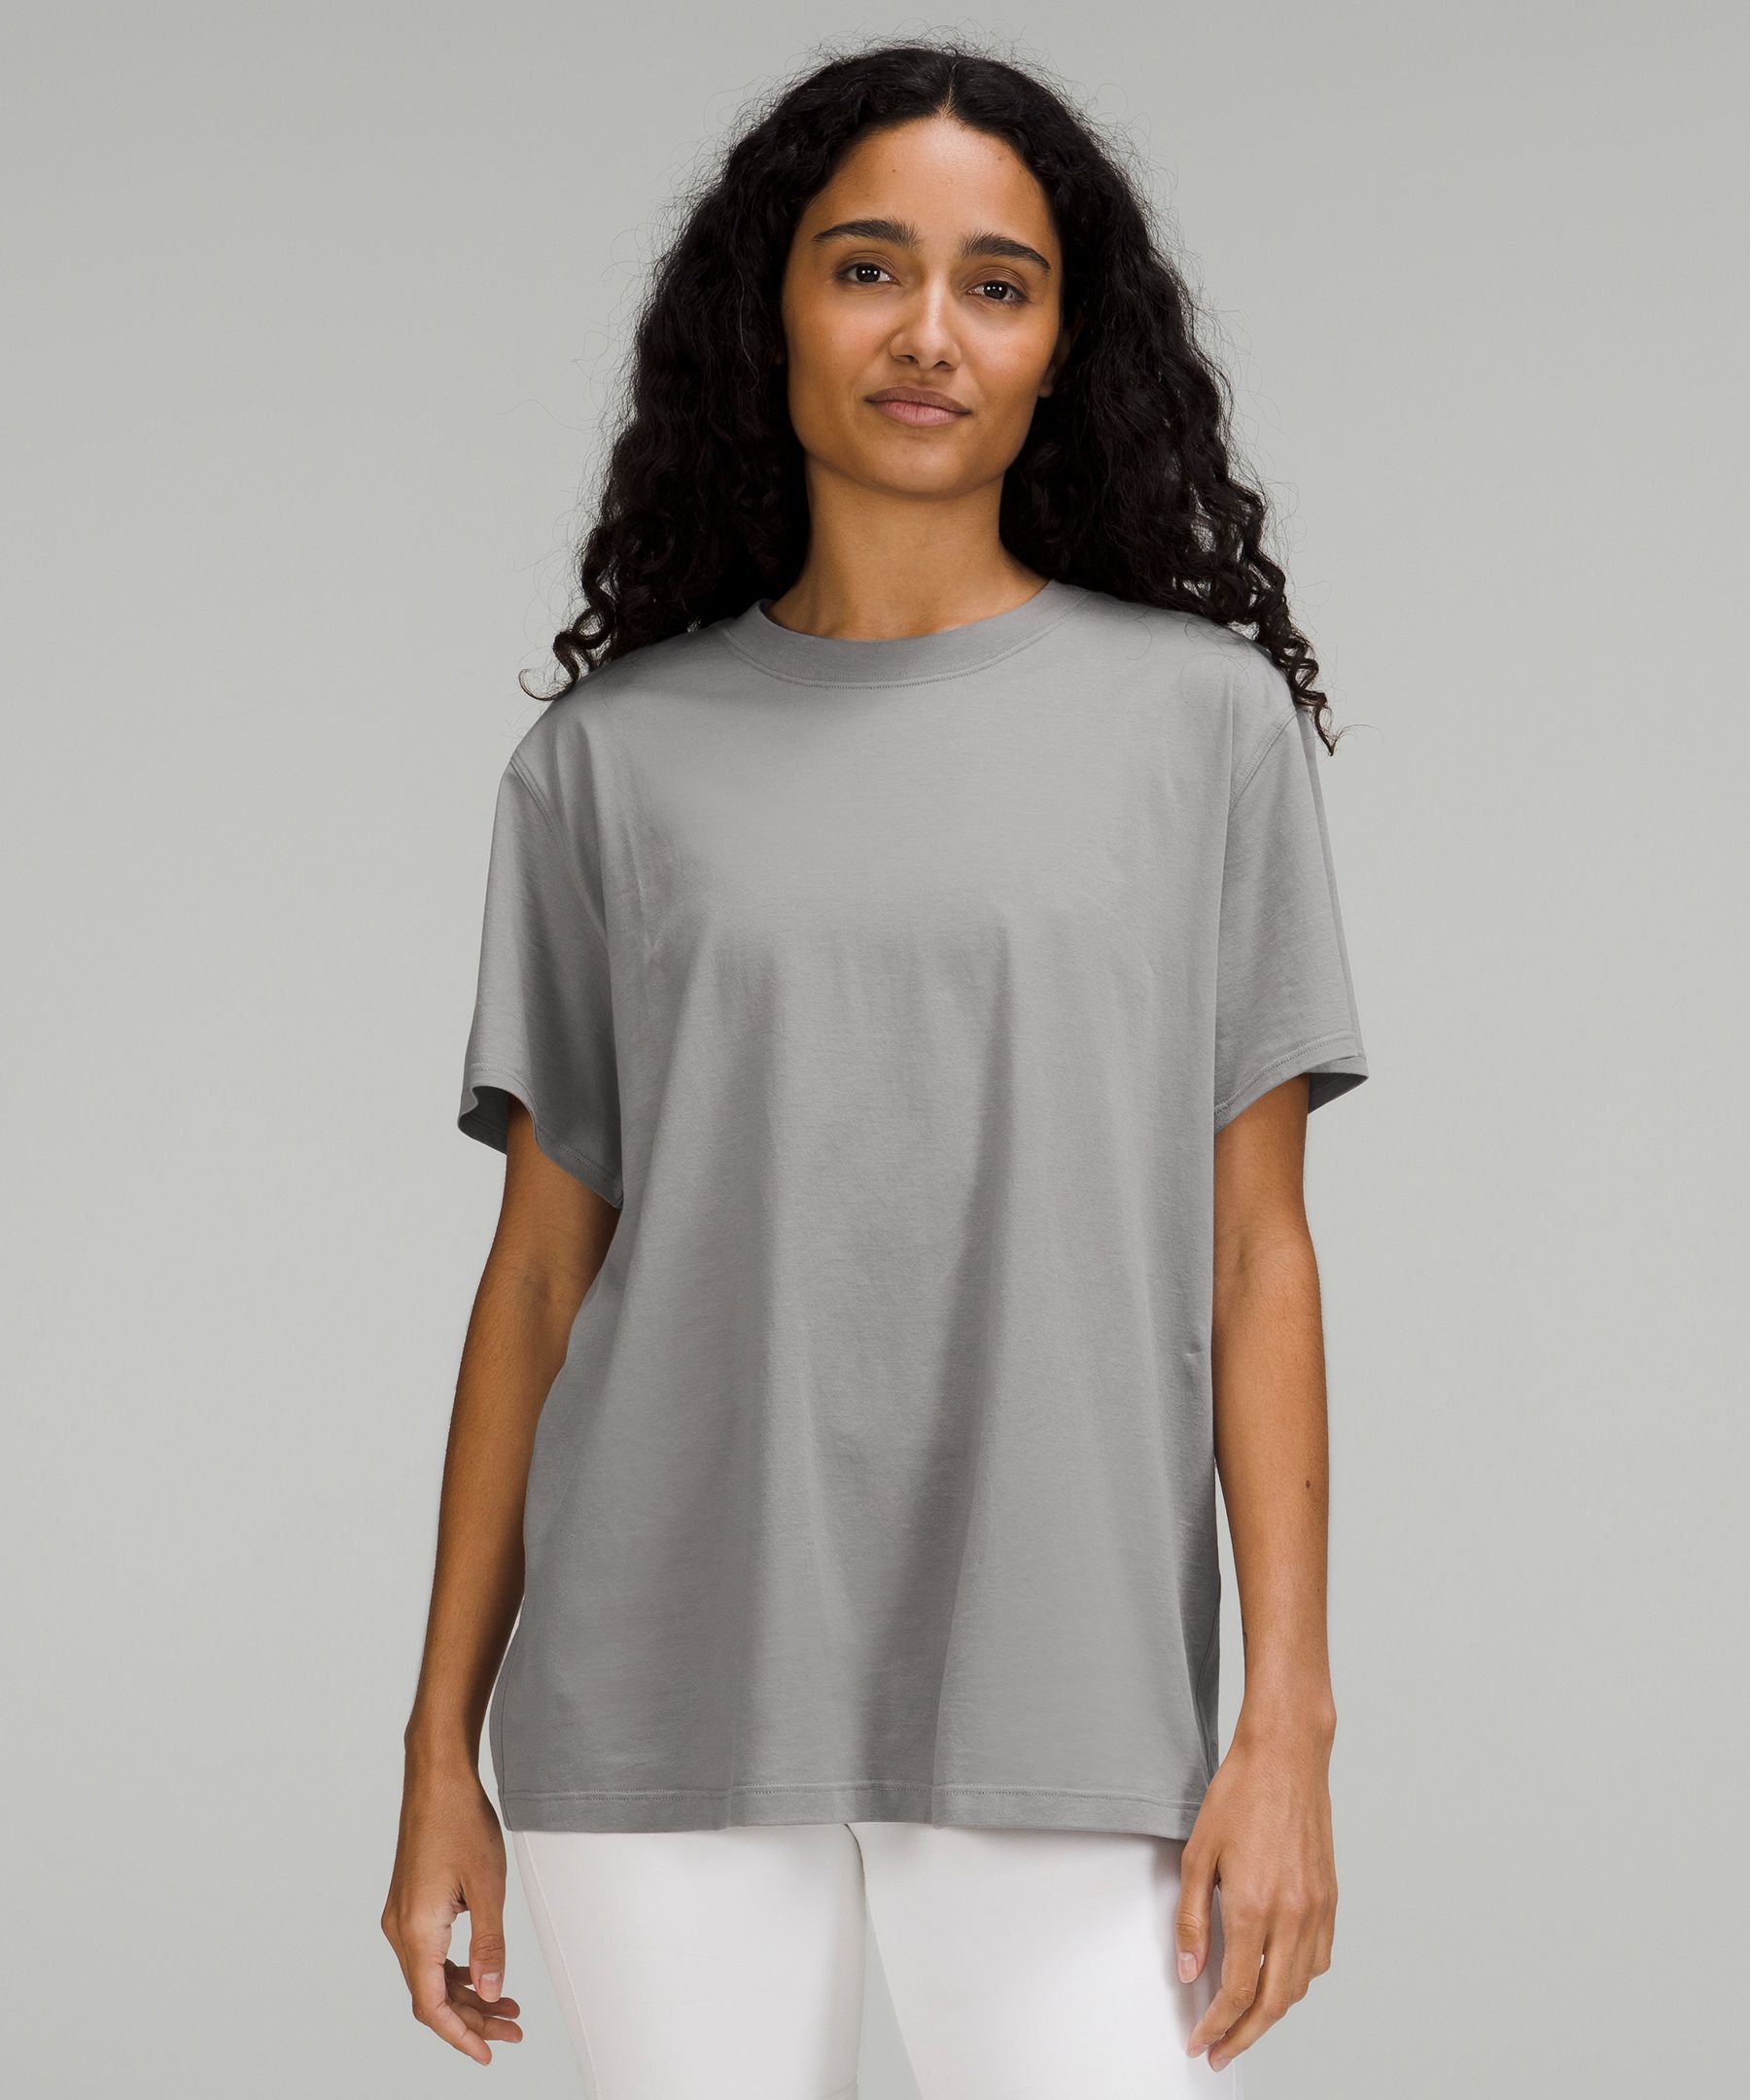 Lululemon All Yours Cotton T-shirt In Gull Grey